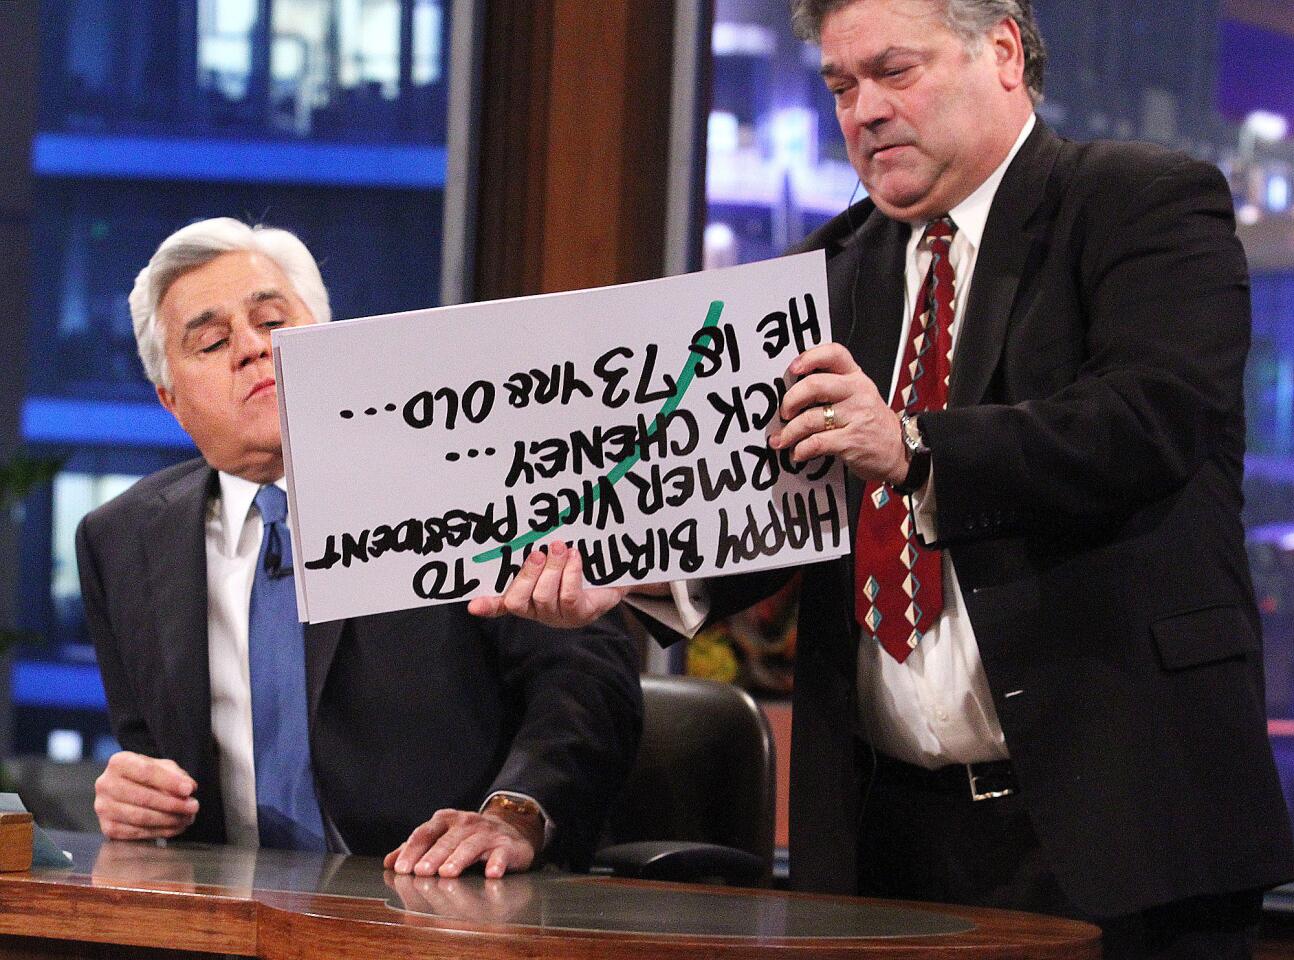 Photo Gallery: Final recording of The Tonight Show with Jay Leno